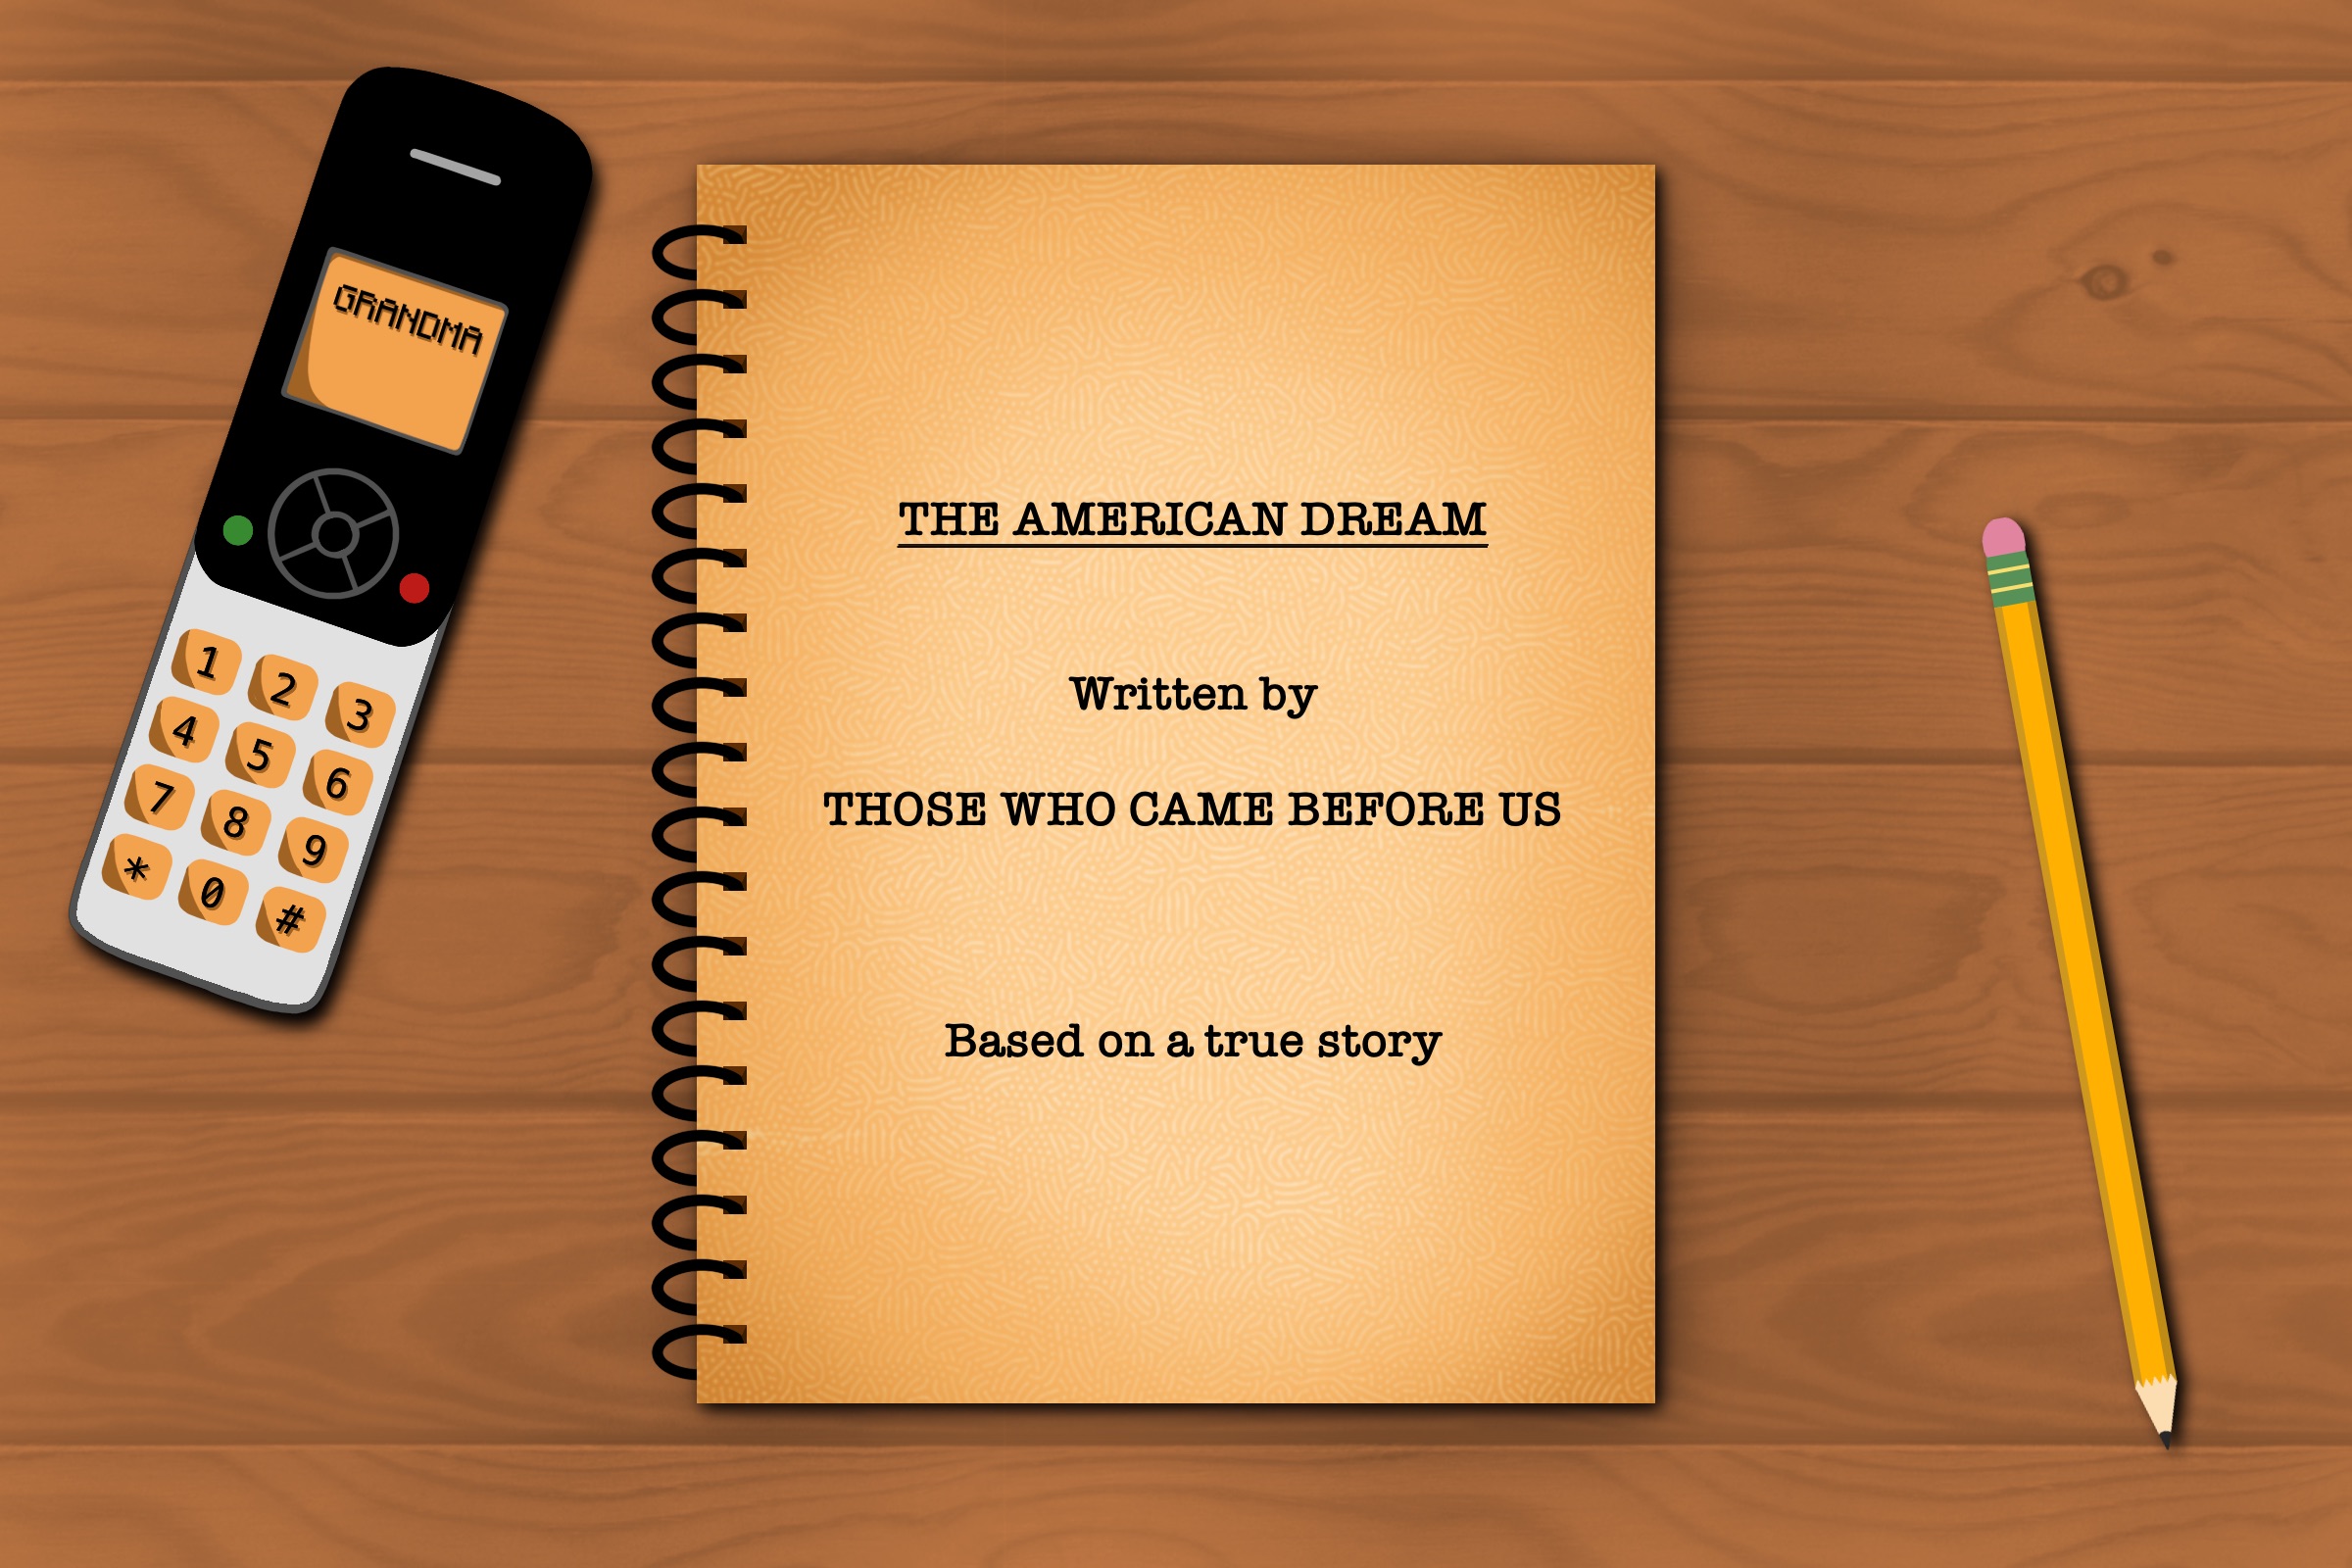 illustration of an old script lying on a wooden table with a cordless landline phone and a pencil. the cover reads "the american dream. written by those who came before us. based on a true story.